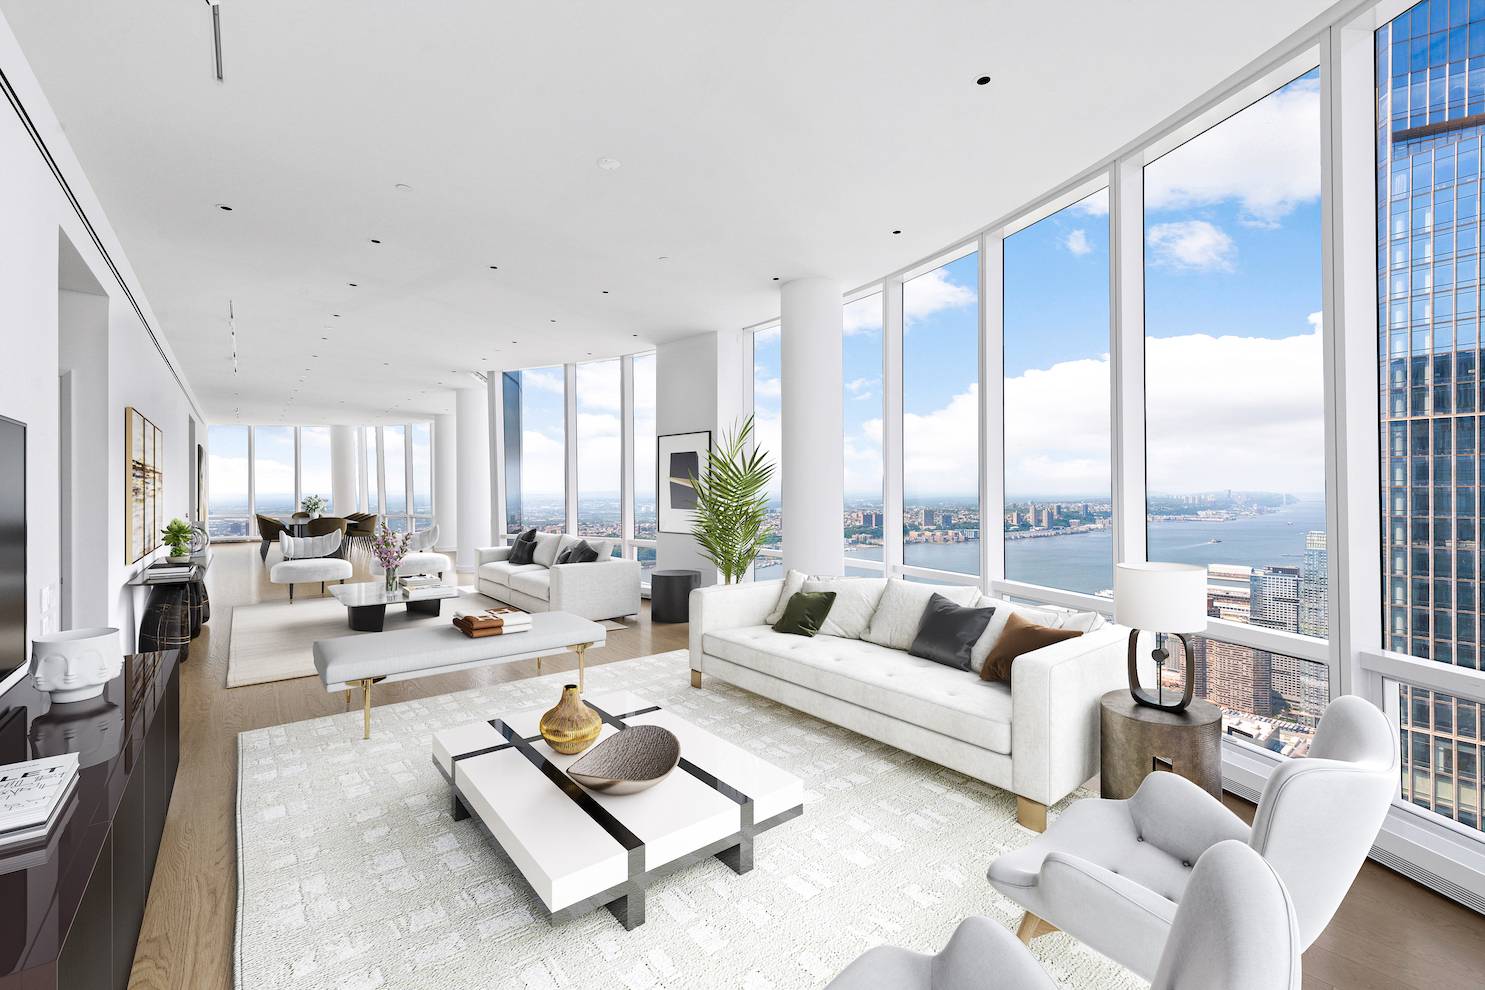 Introducing this never before lived in sky mansion in the exclusive Hudson Yards neighborhood, a sublime 4 bedroom, 5 bathroom condo with a one of a kind combination layout enveloped ...